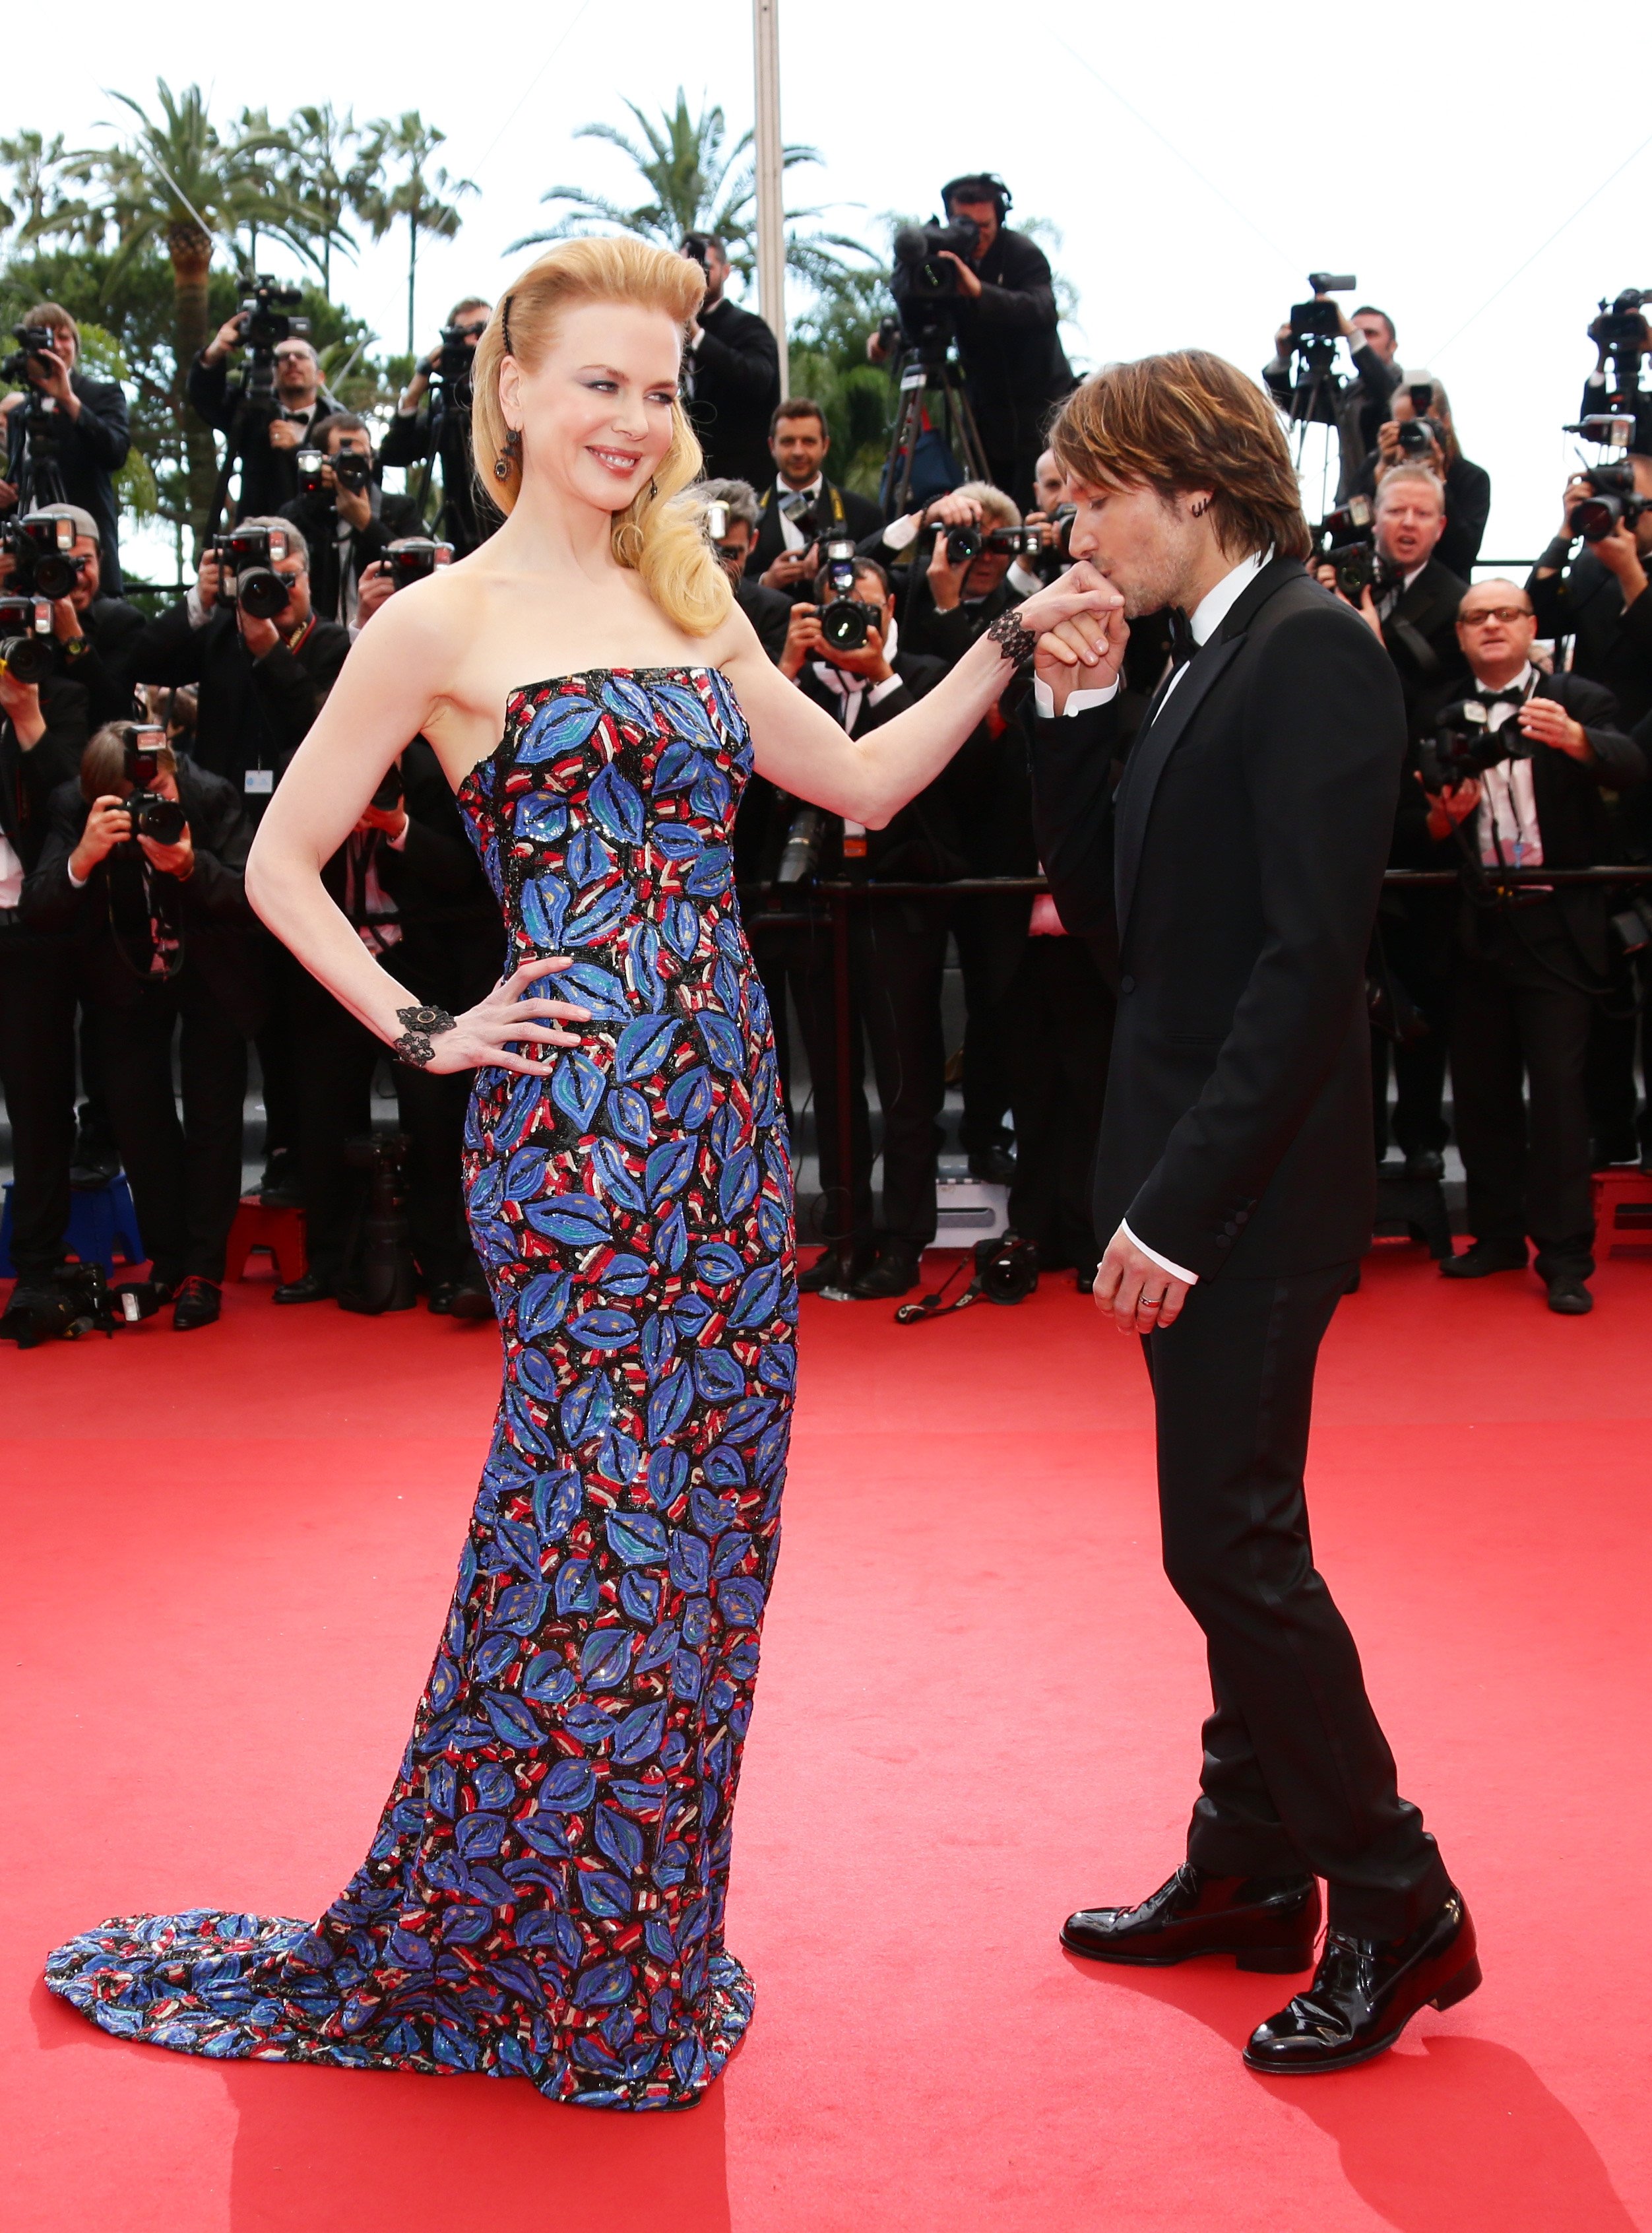 Musician Keith Urban and actress Nicole Kidman attend the 'Inside Llewyn Davis' Premiere on May 19, 2013 in Cannes, France. | Source: Getty Images 